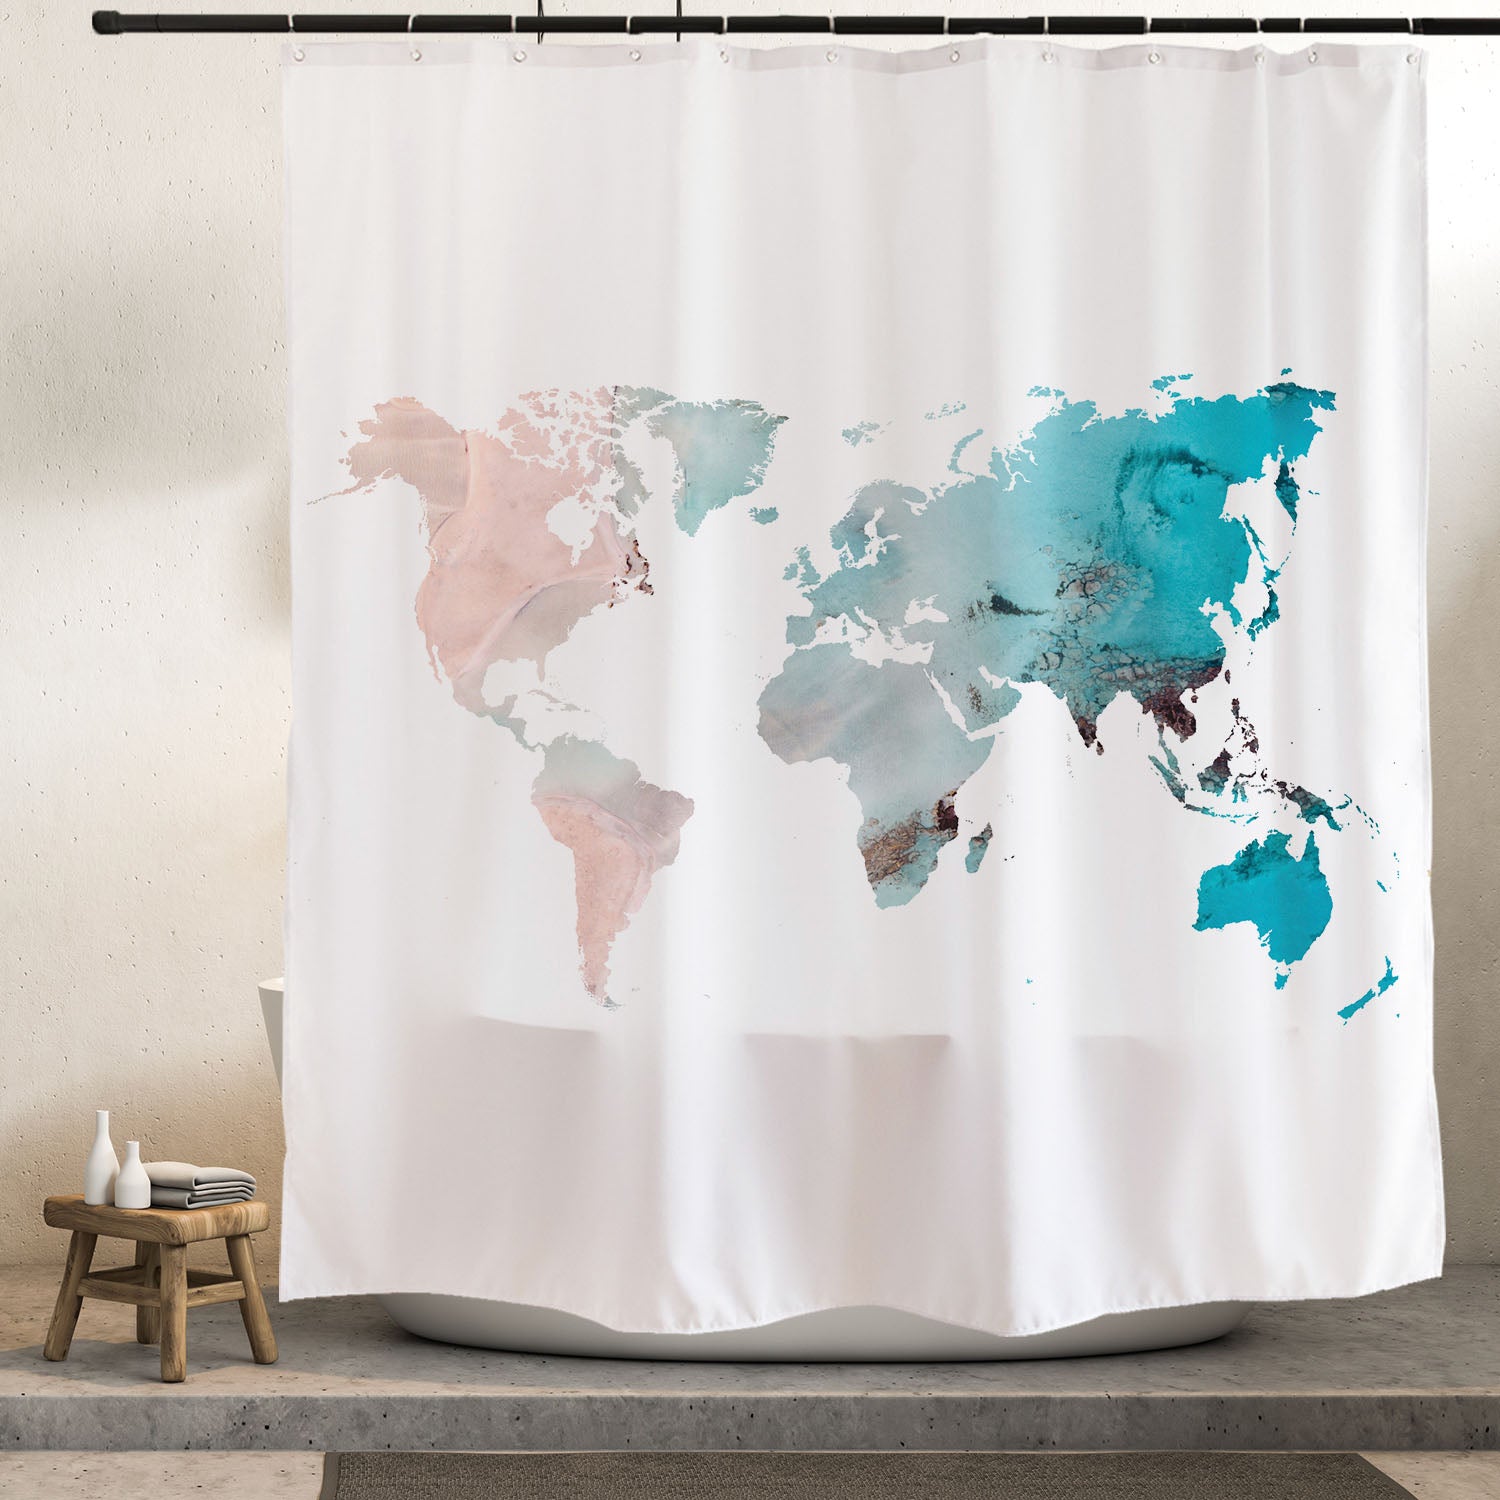 Feblilac Wave Map Shower Curtain with Hooks